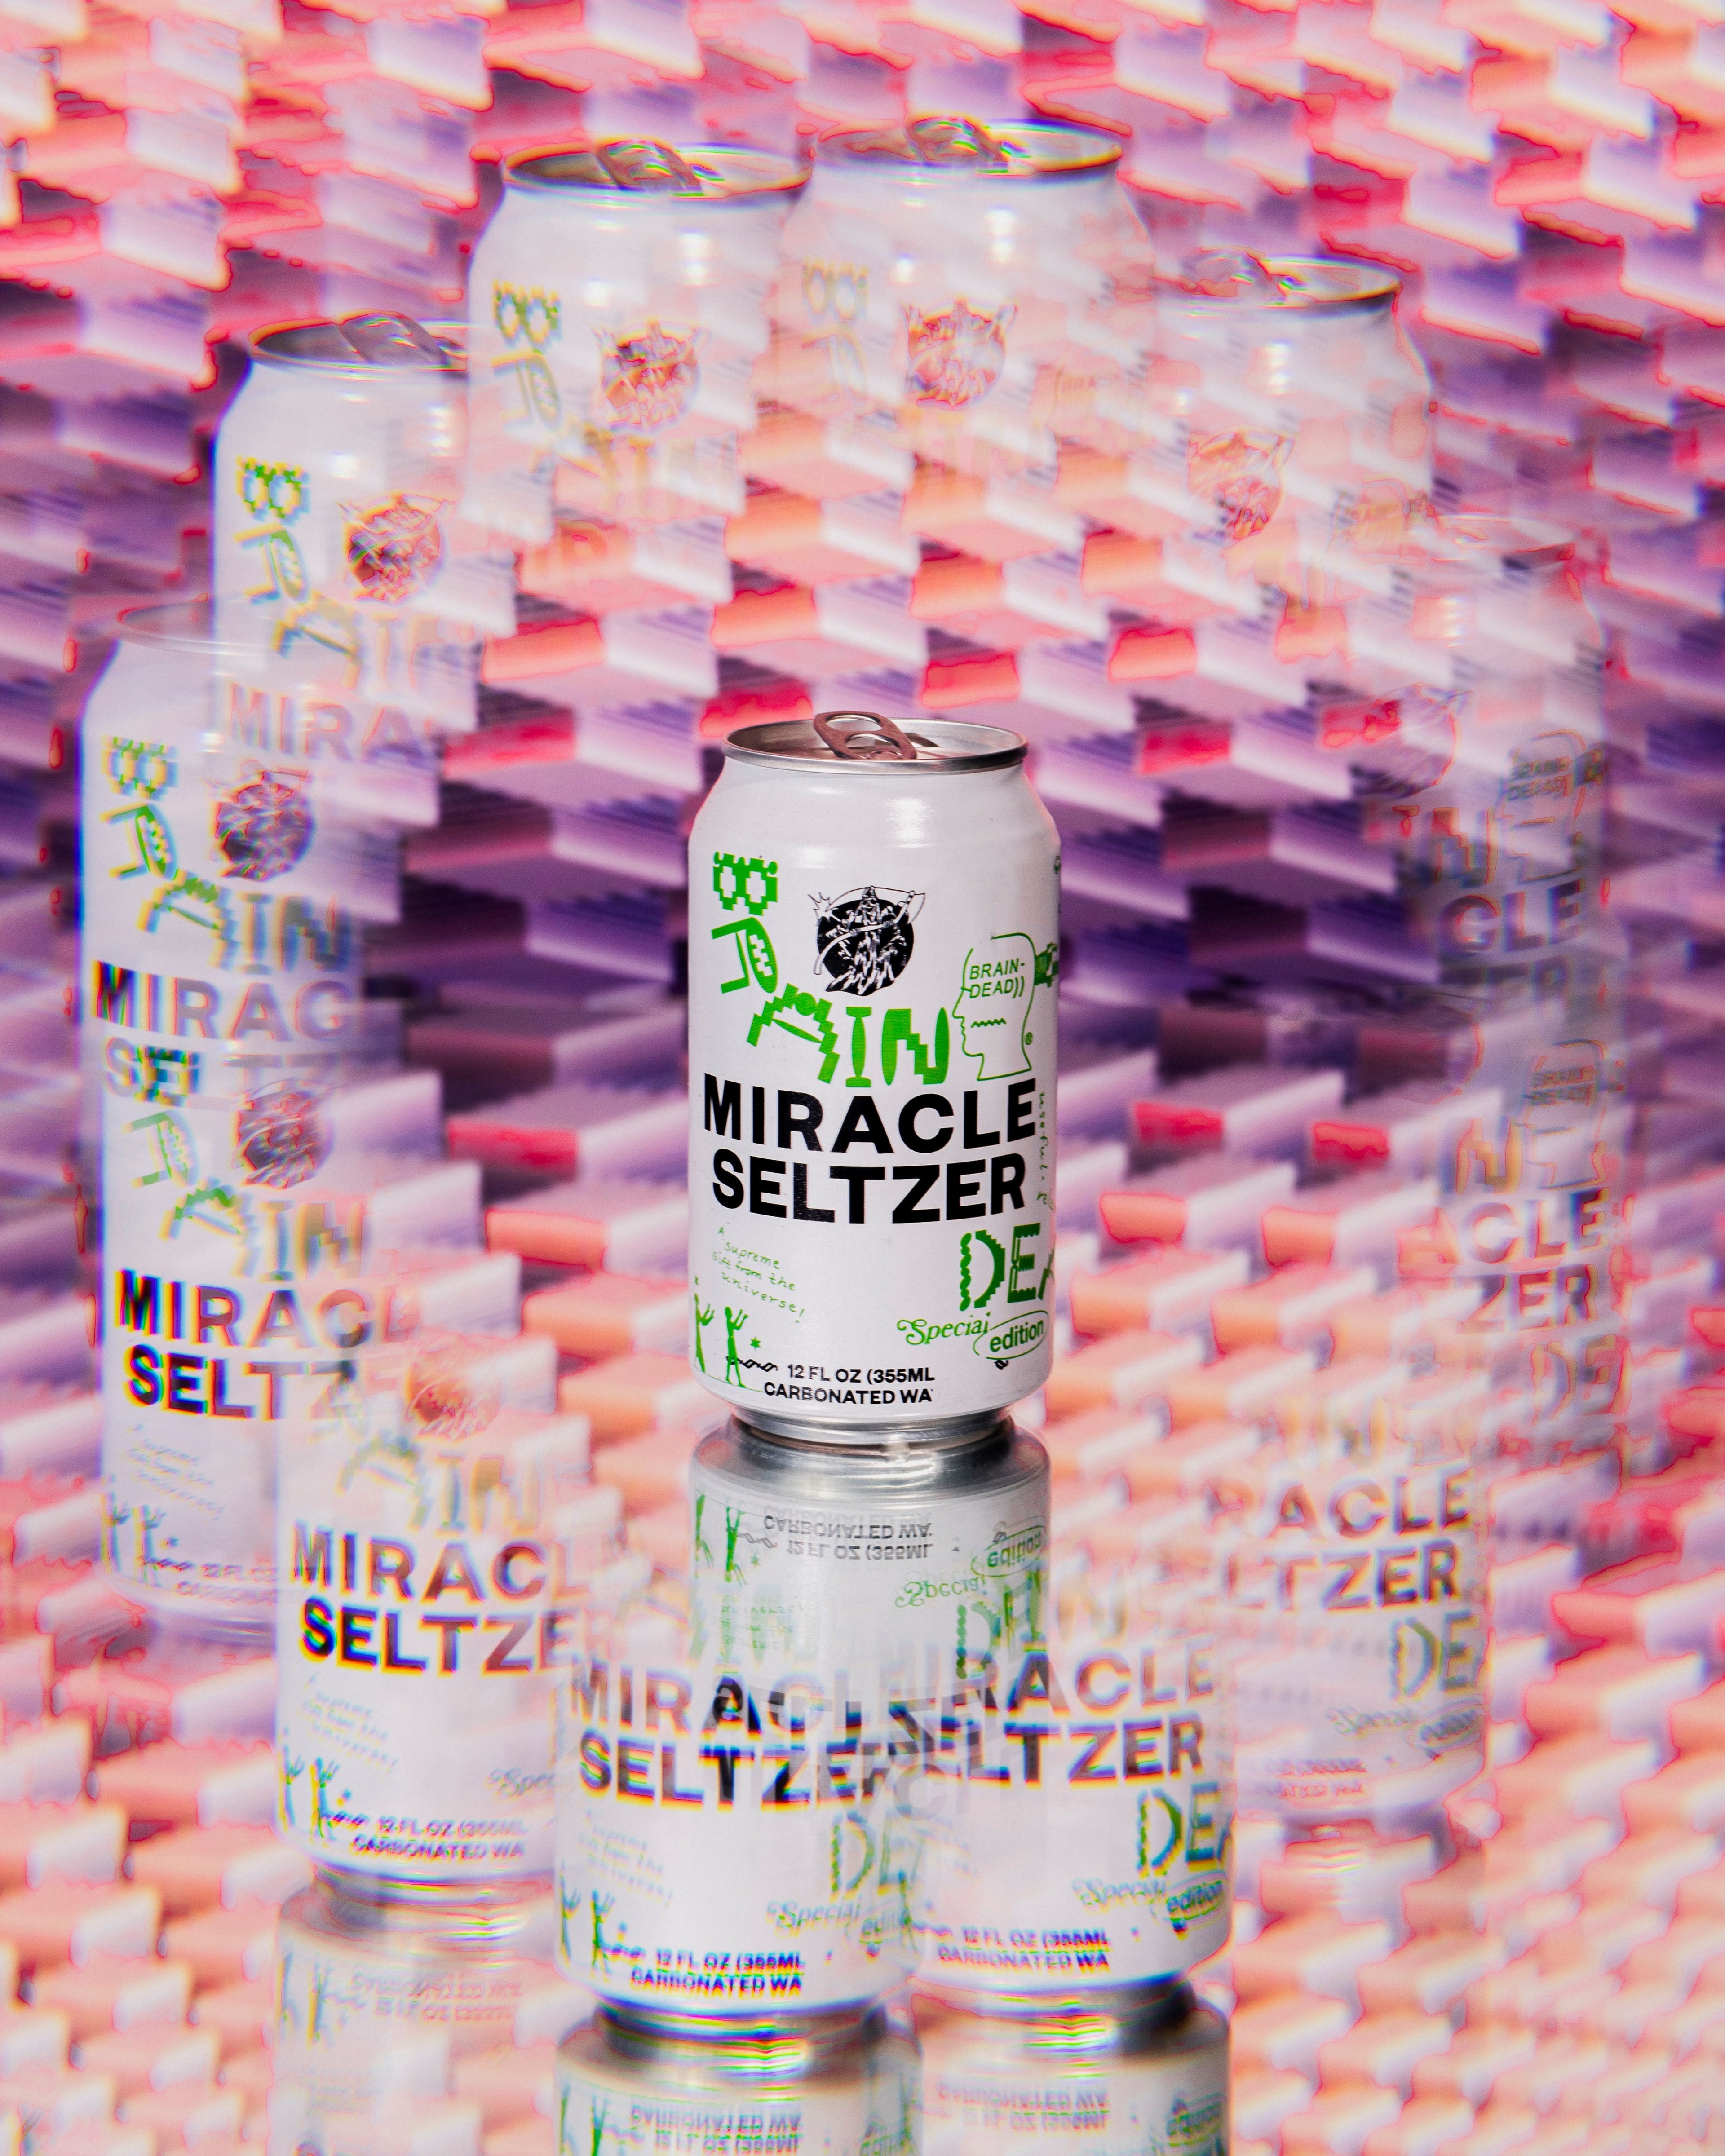 photo of miracle seltzer can set on an infinity mirror